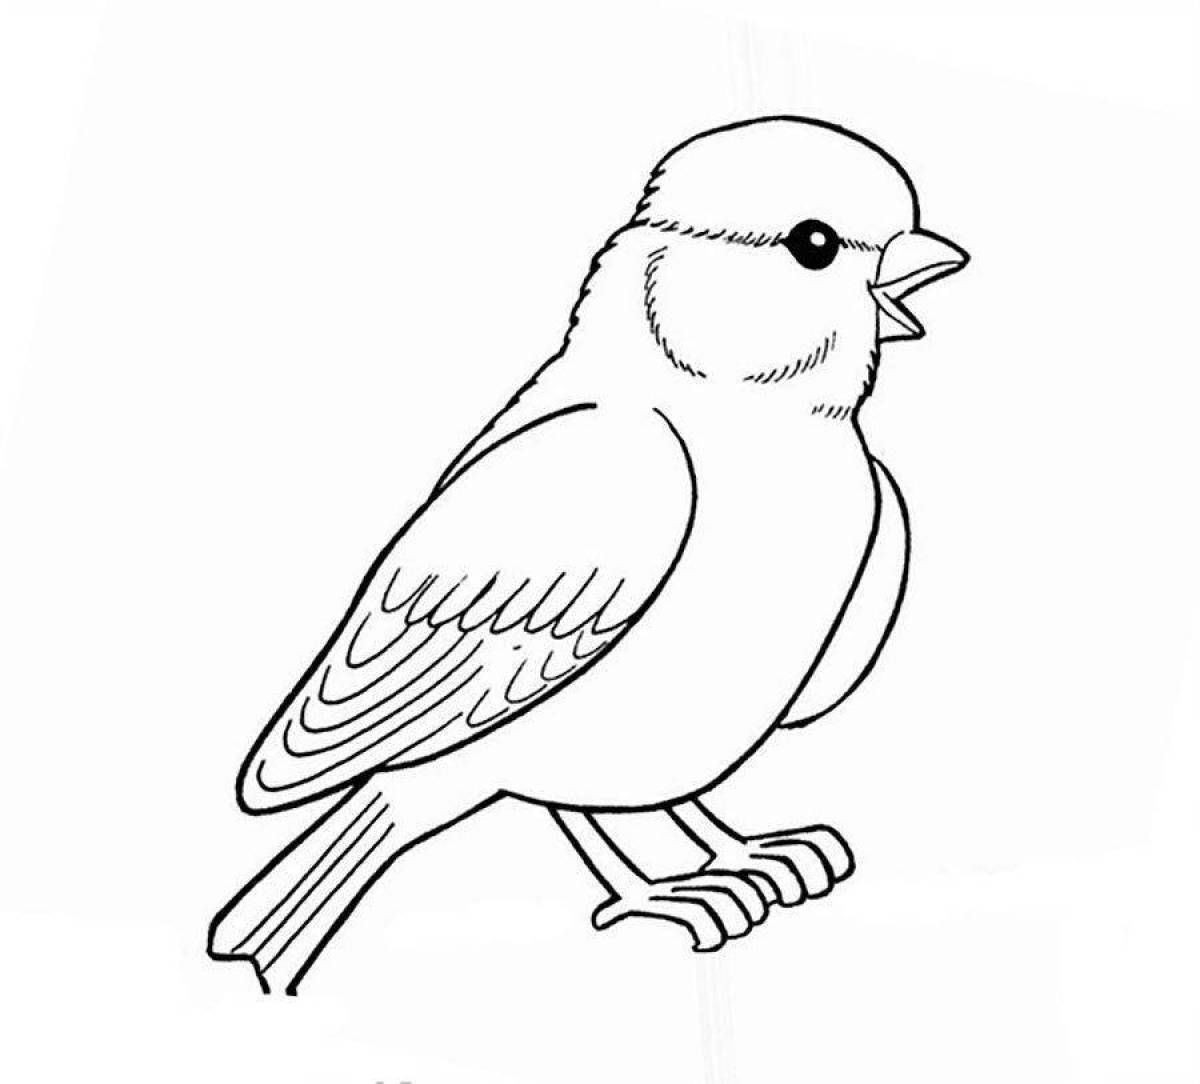 Sunny Tit coloring page